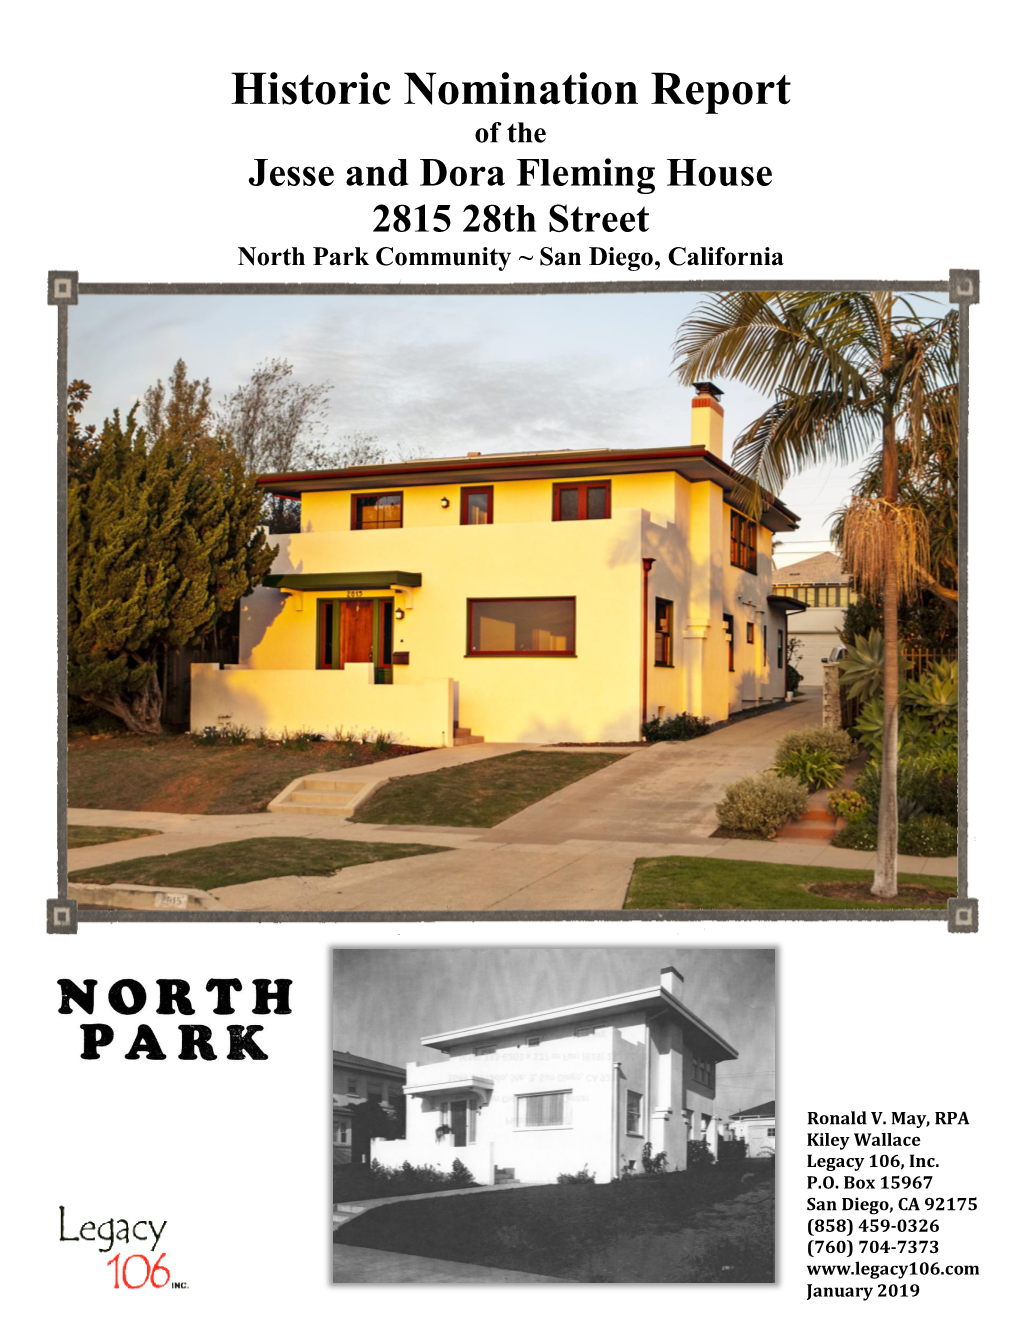 Historic Nomination Report of the Jesse and Dora Fleming House 2815 28Th Street North Park Community ~ San Diego, California